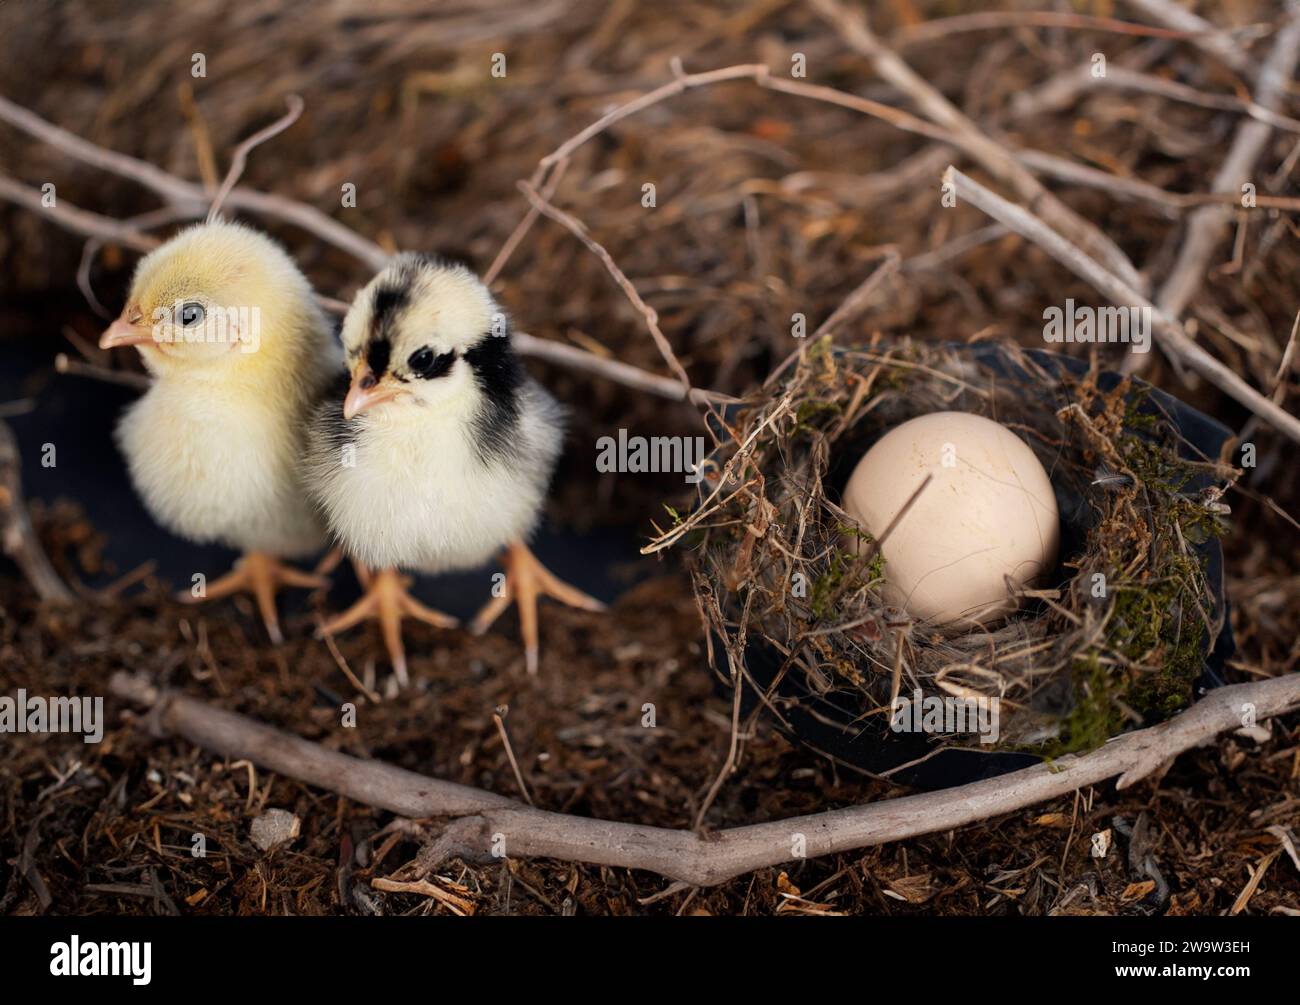 nest, egg and chick in front of dark background Stock Photo